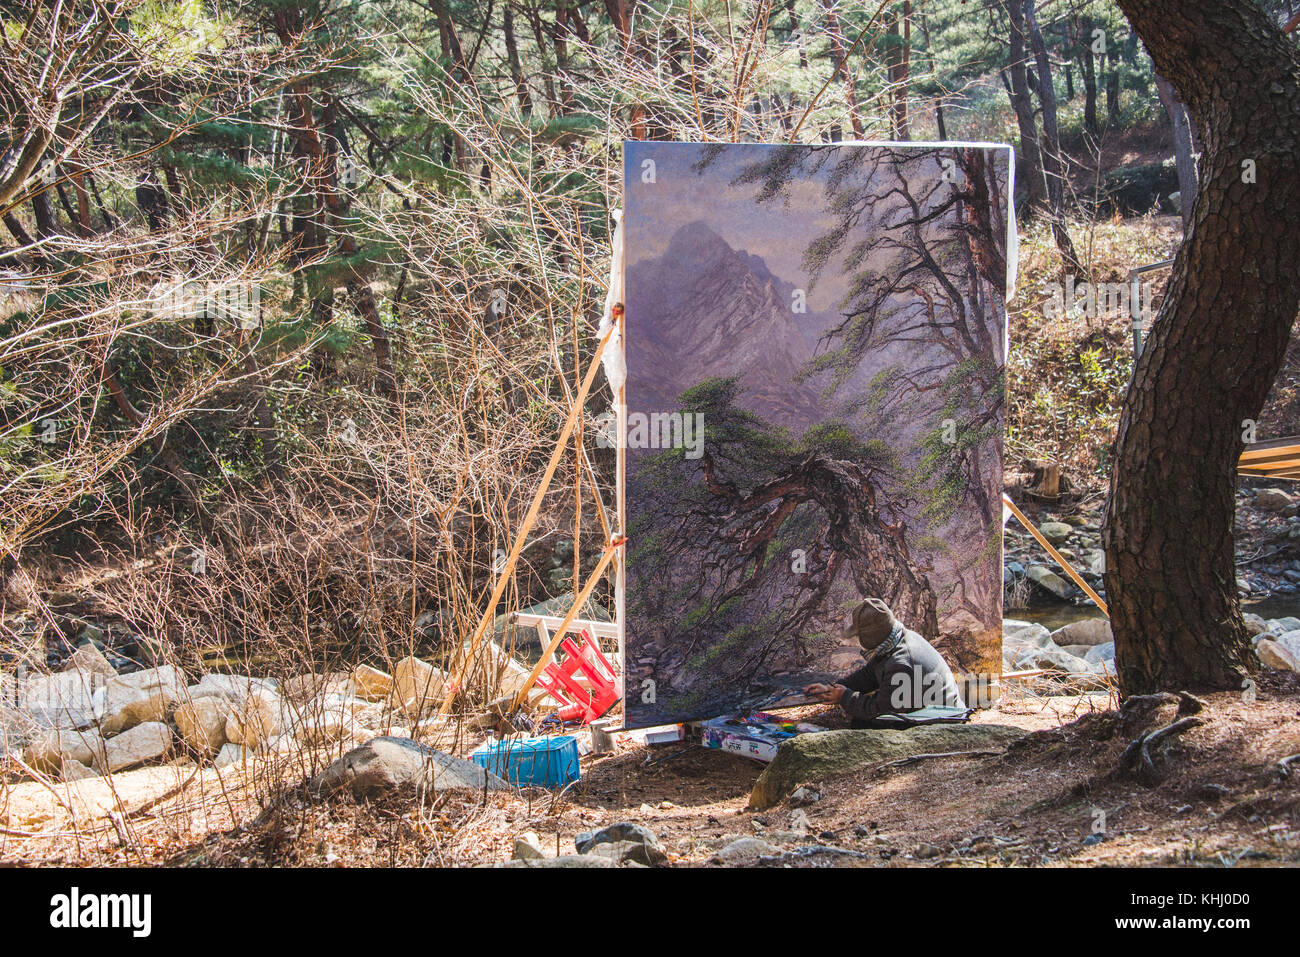 A korean man painting a large landscape picture in Tongdosa, South Korea. Stock Photo